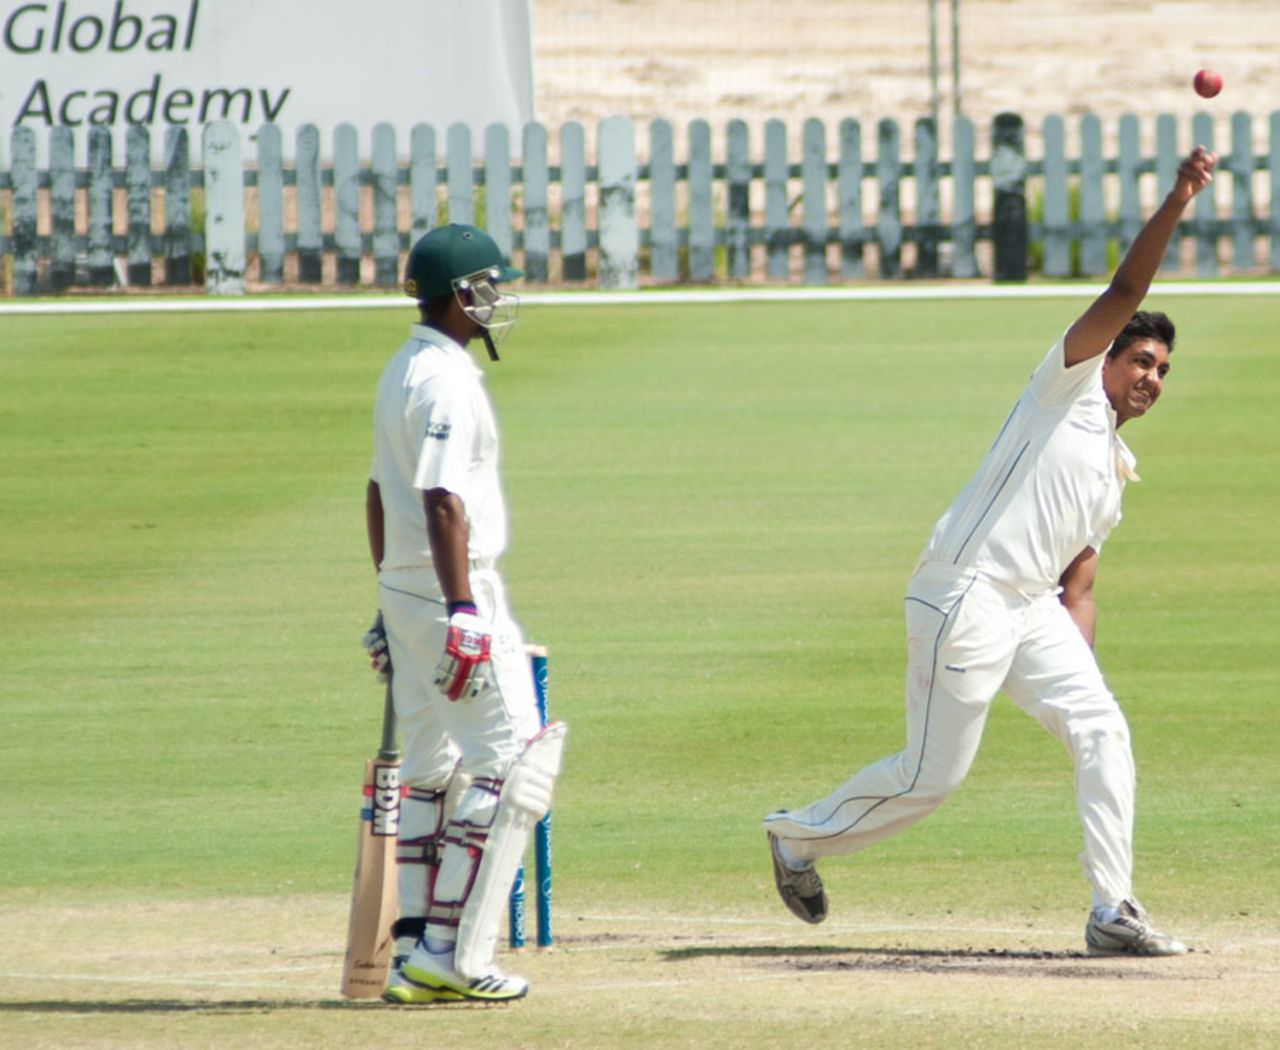 Nikhil Dutta completes his bowling action, Canada v Kenya, ICC Intercontinental Cup, Sharjah, 3rd day, March 20, 2013